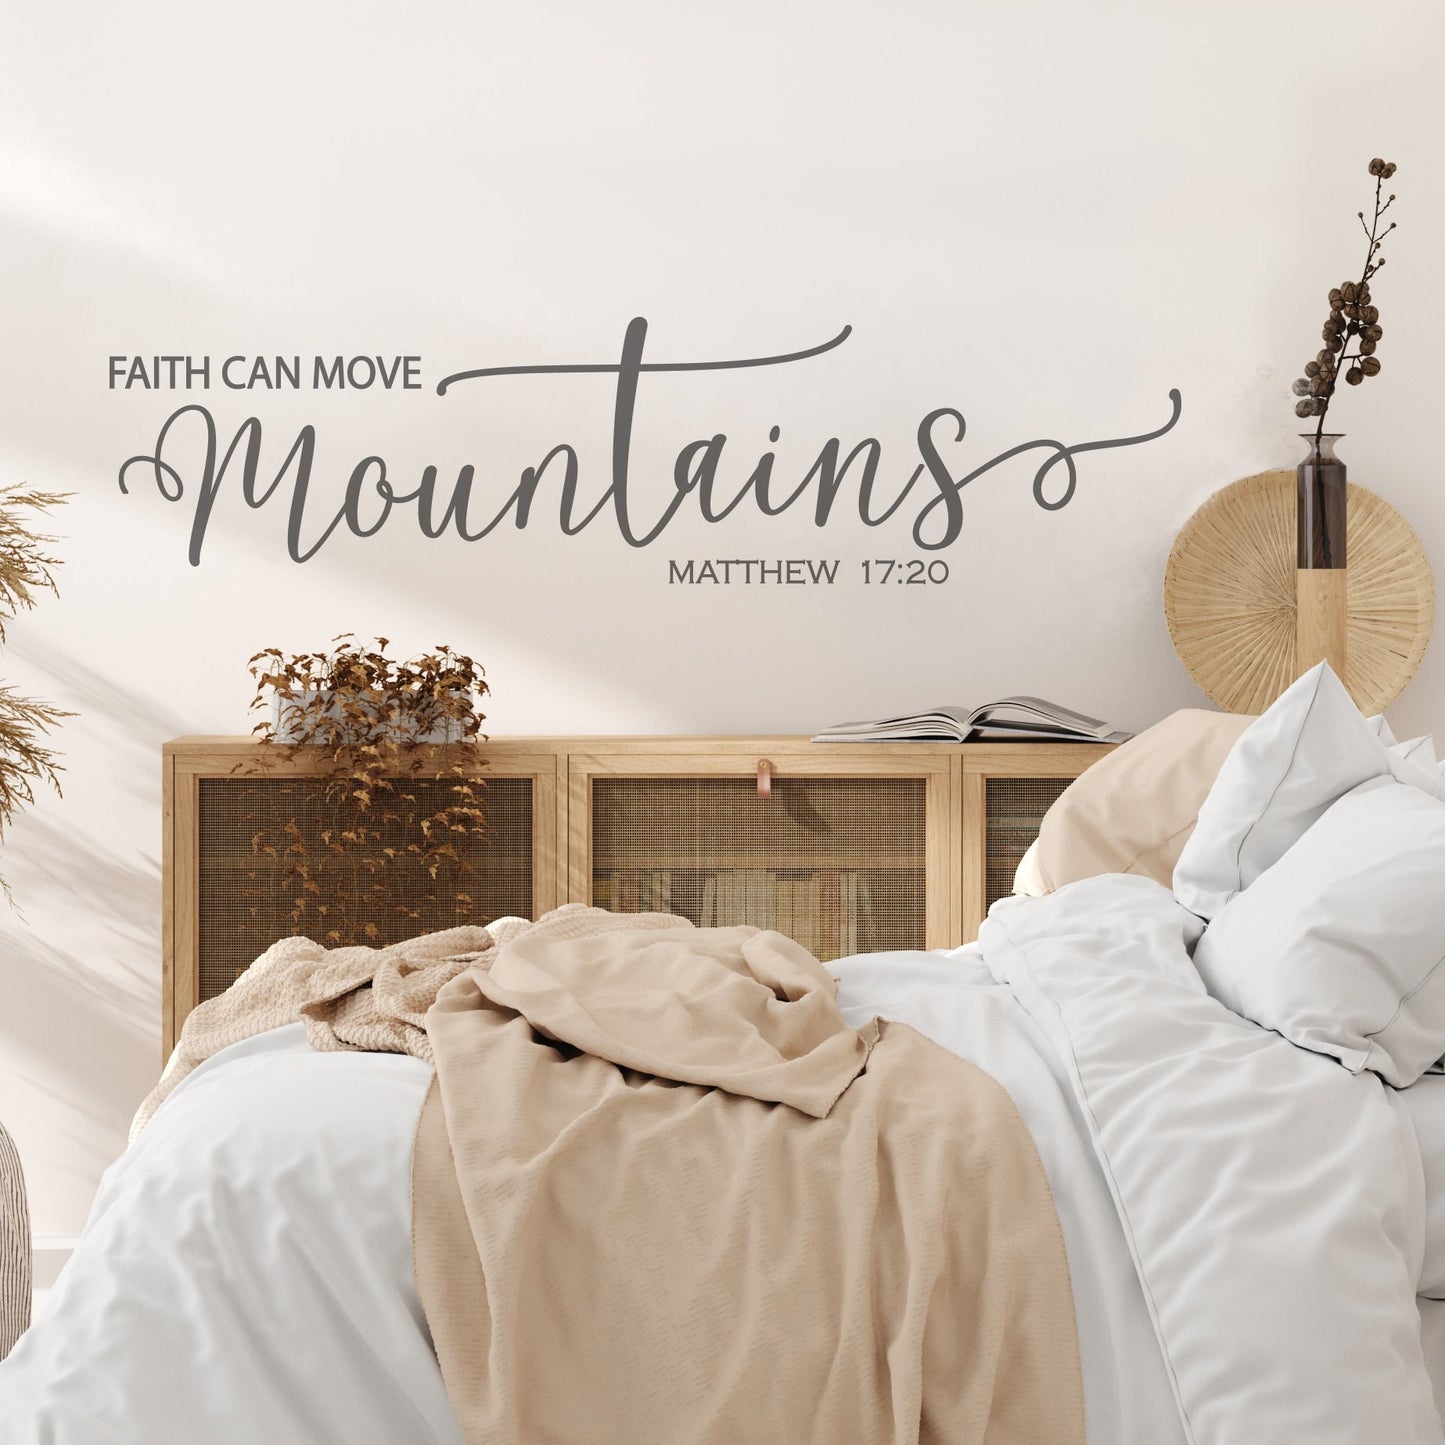 Faith can move mountains matthew 17:20 text wall decal quote sticker, LF220